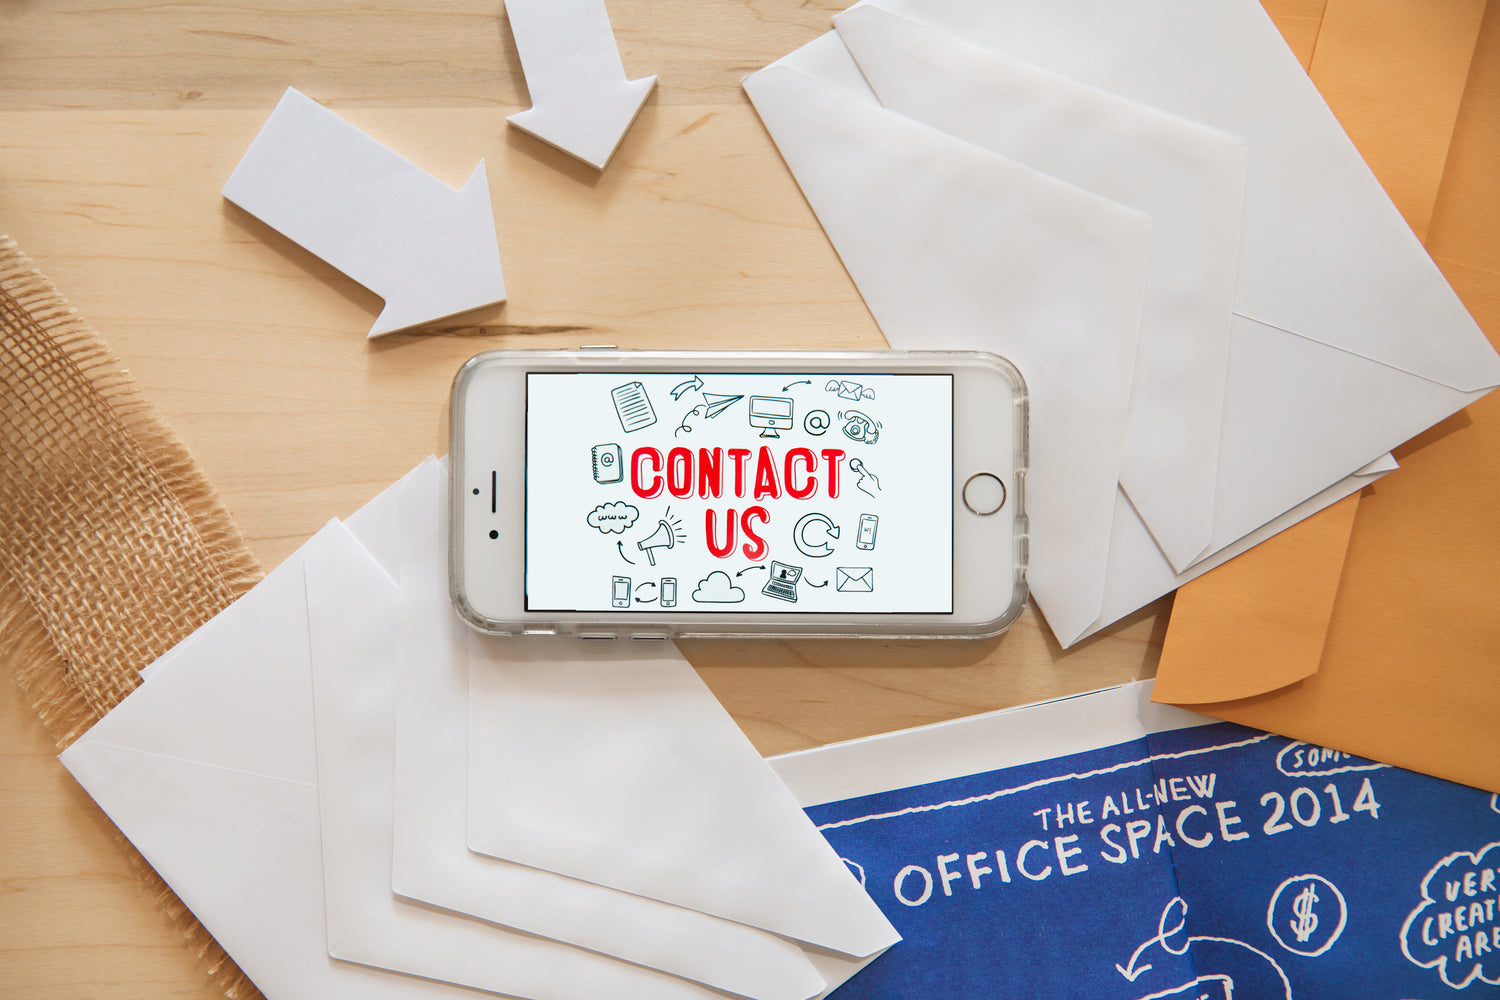 "Contact Us" being displayed on an iPhone in landscape view. It is sitting on a desk.